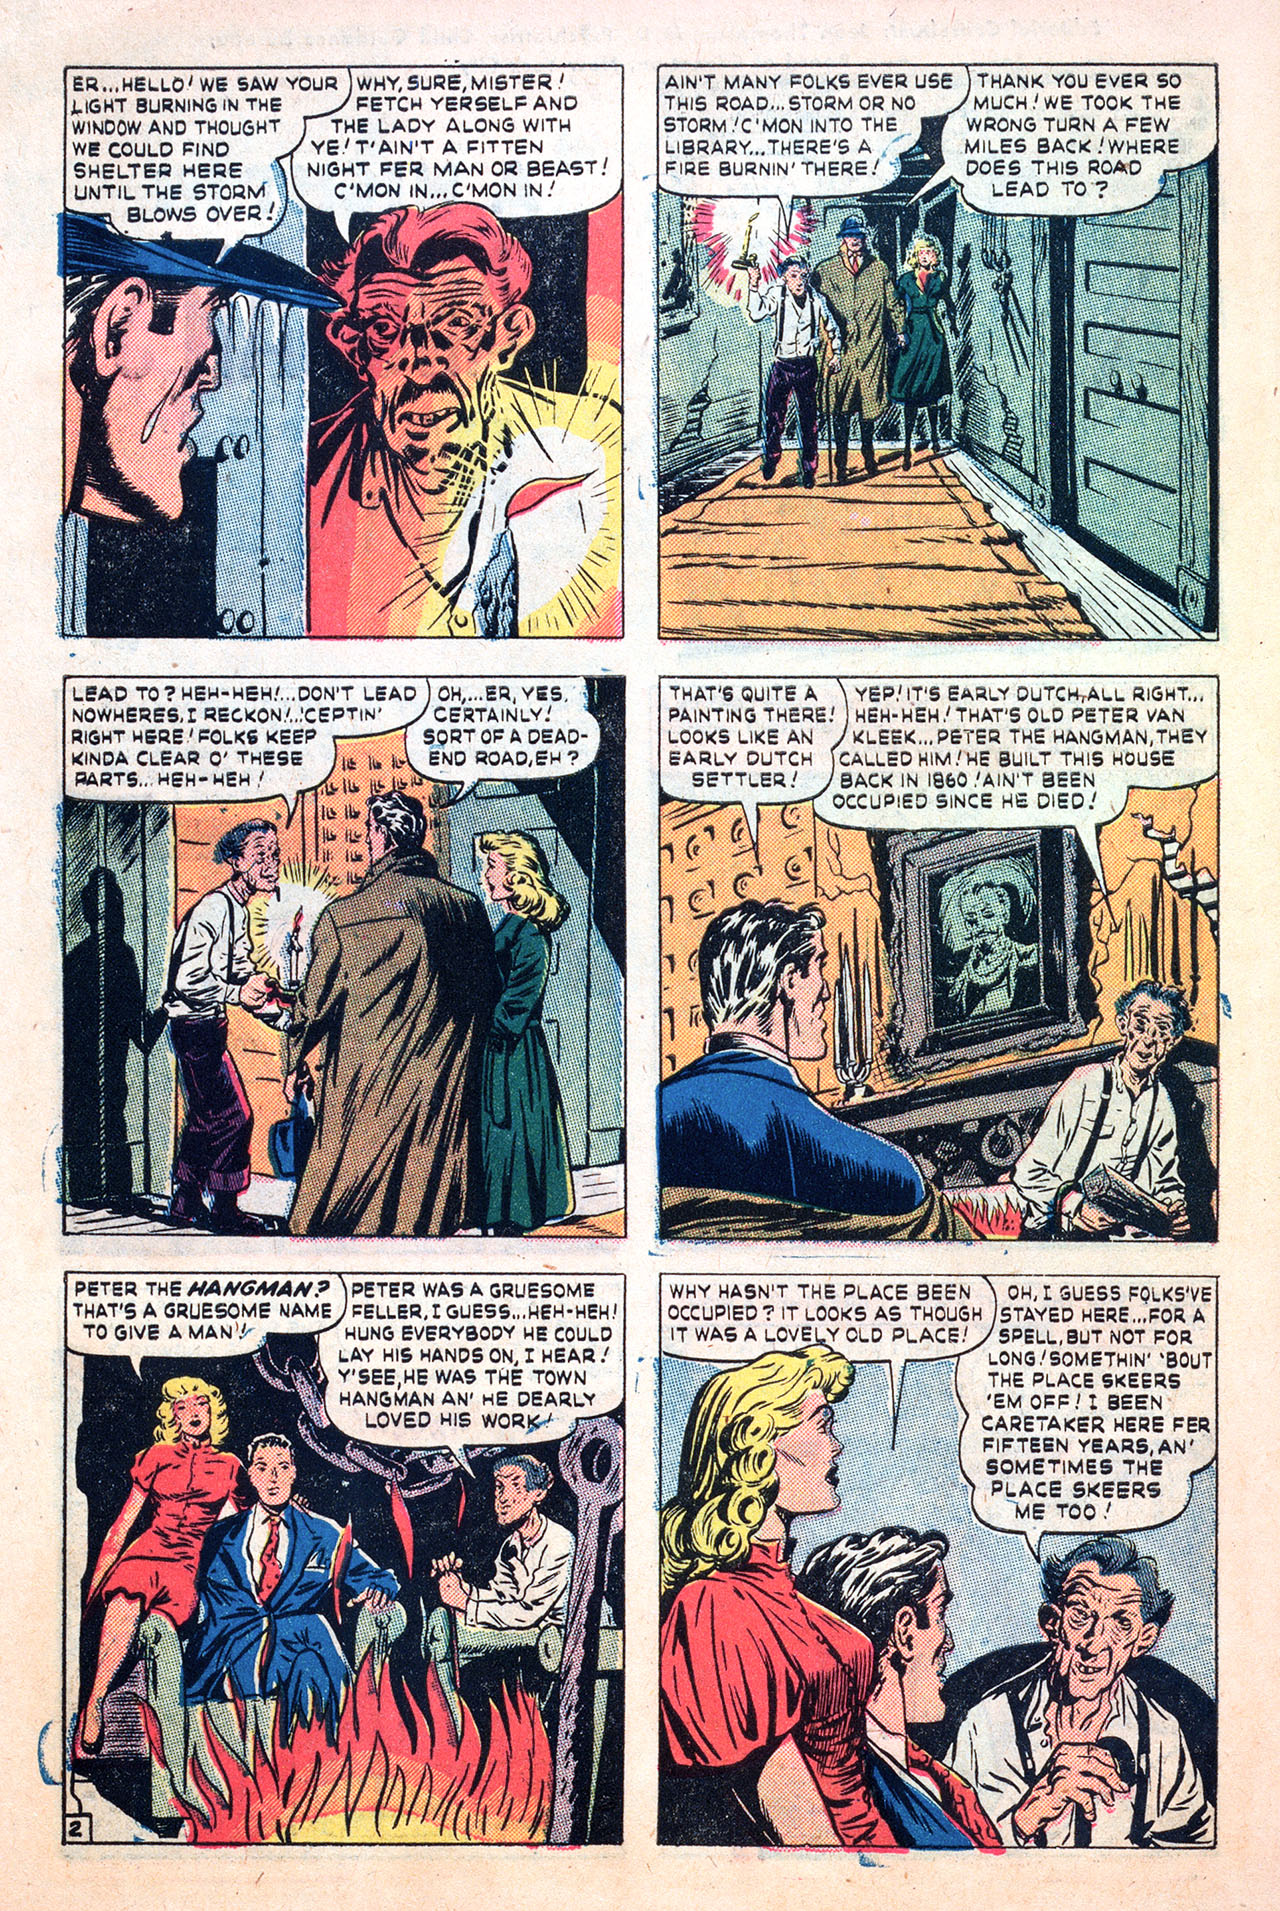 Marvel Tales (1949) 94 Page 3